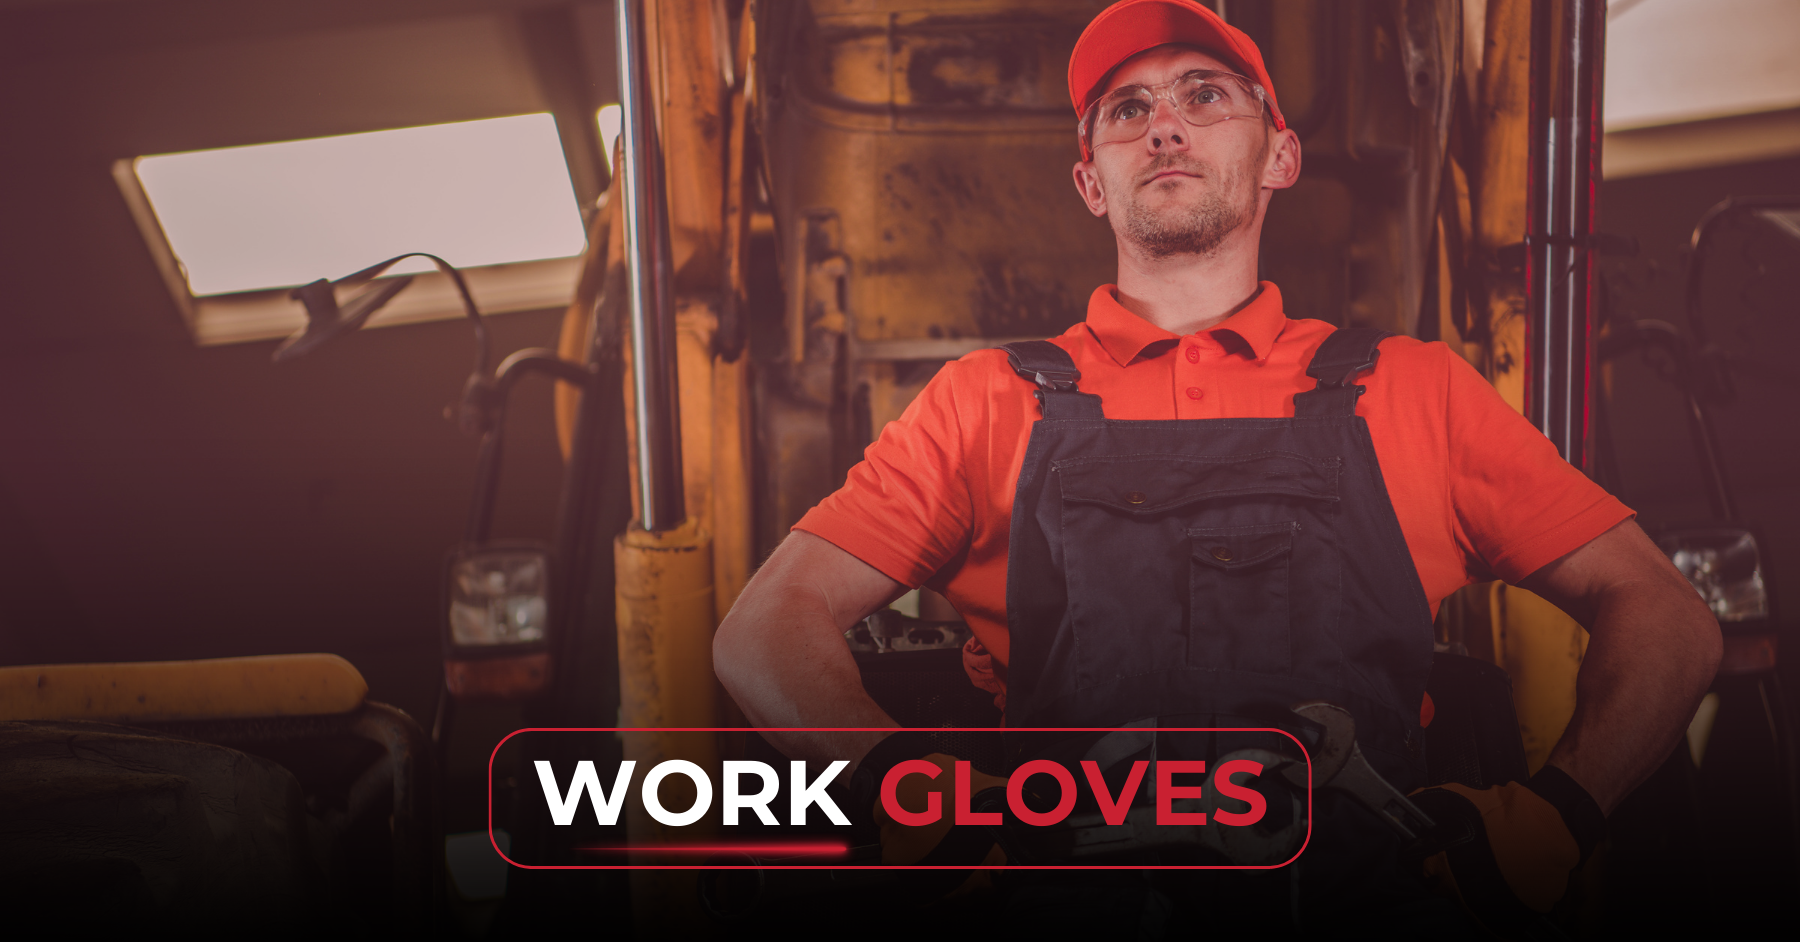 NoorSons work gloves for industrial use